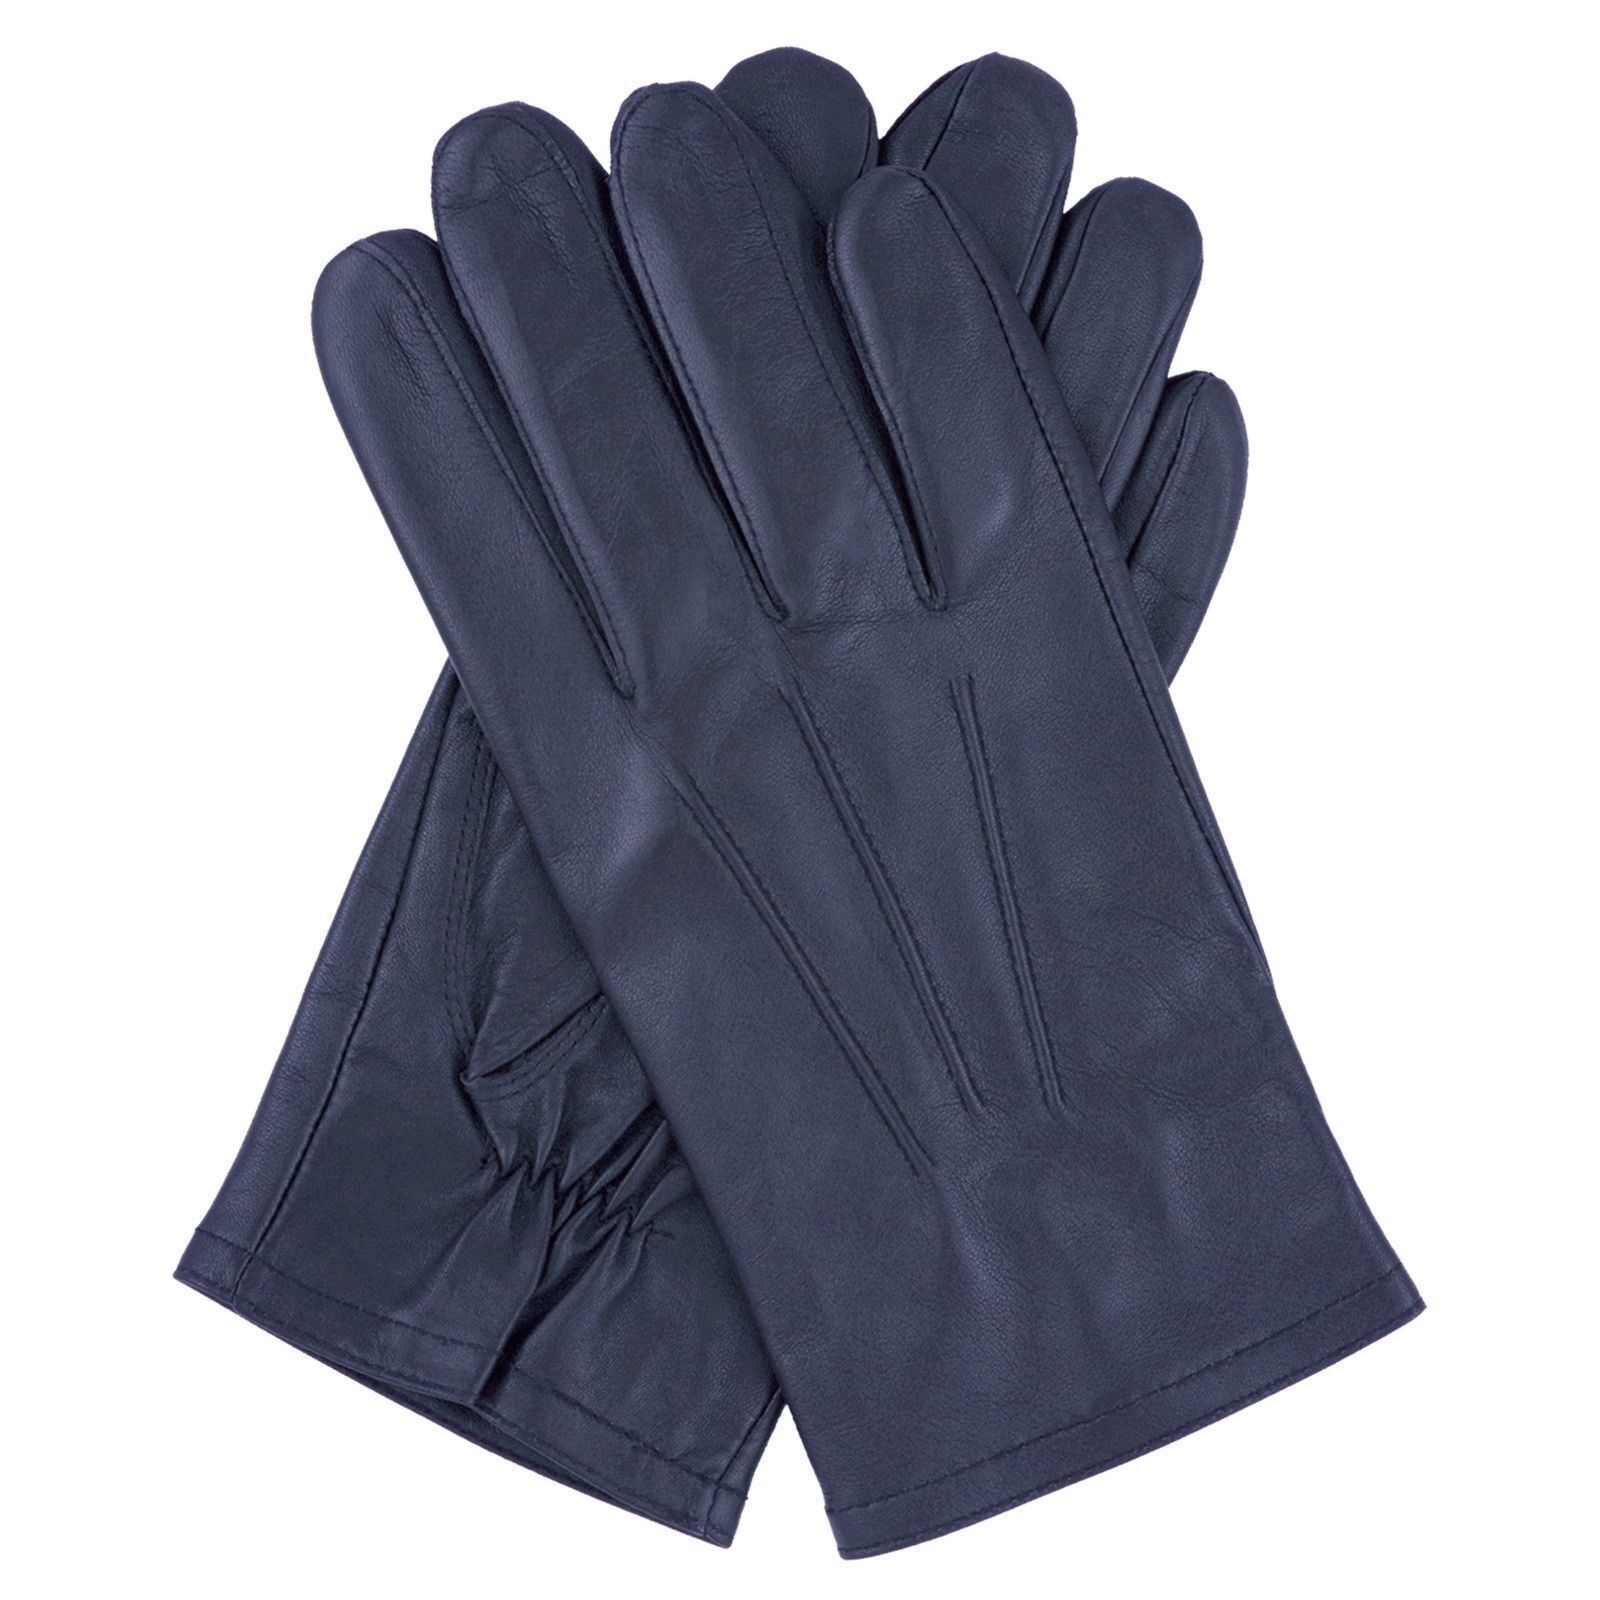 Men's Three-Point Leather Driving Gloves